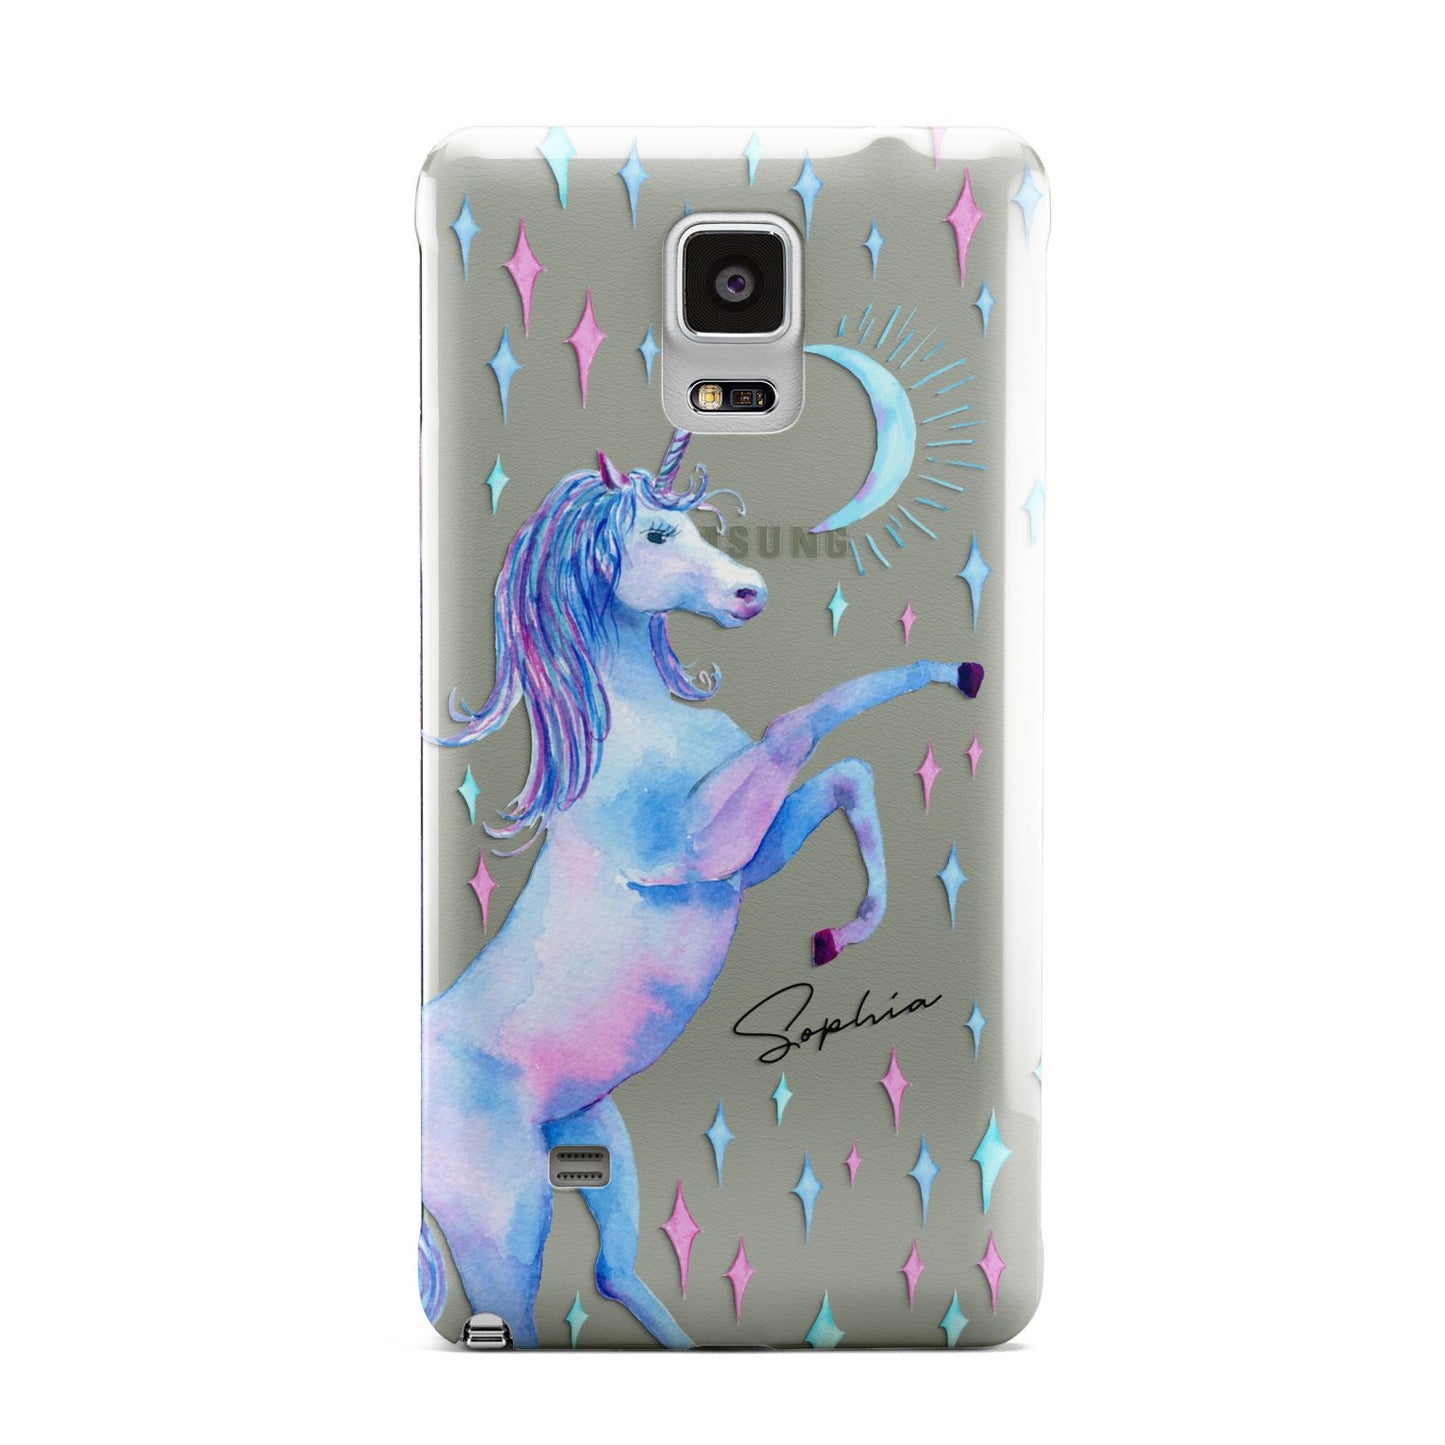 Personalised Unicorn Name Samsung Galaxy Note 4 Case